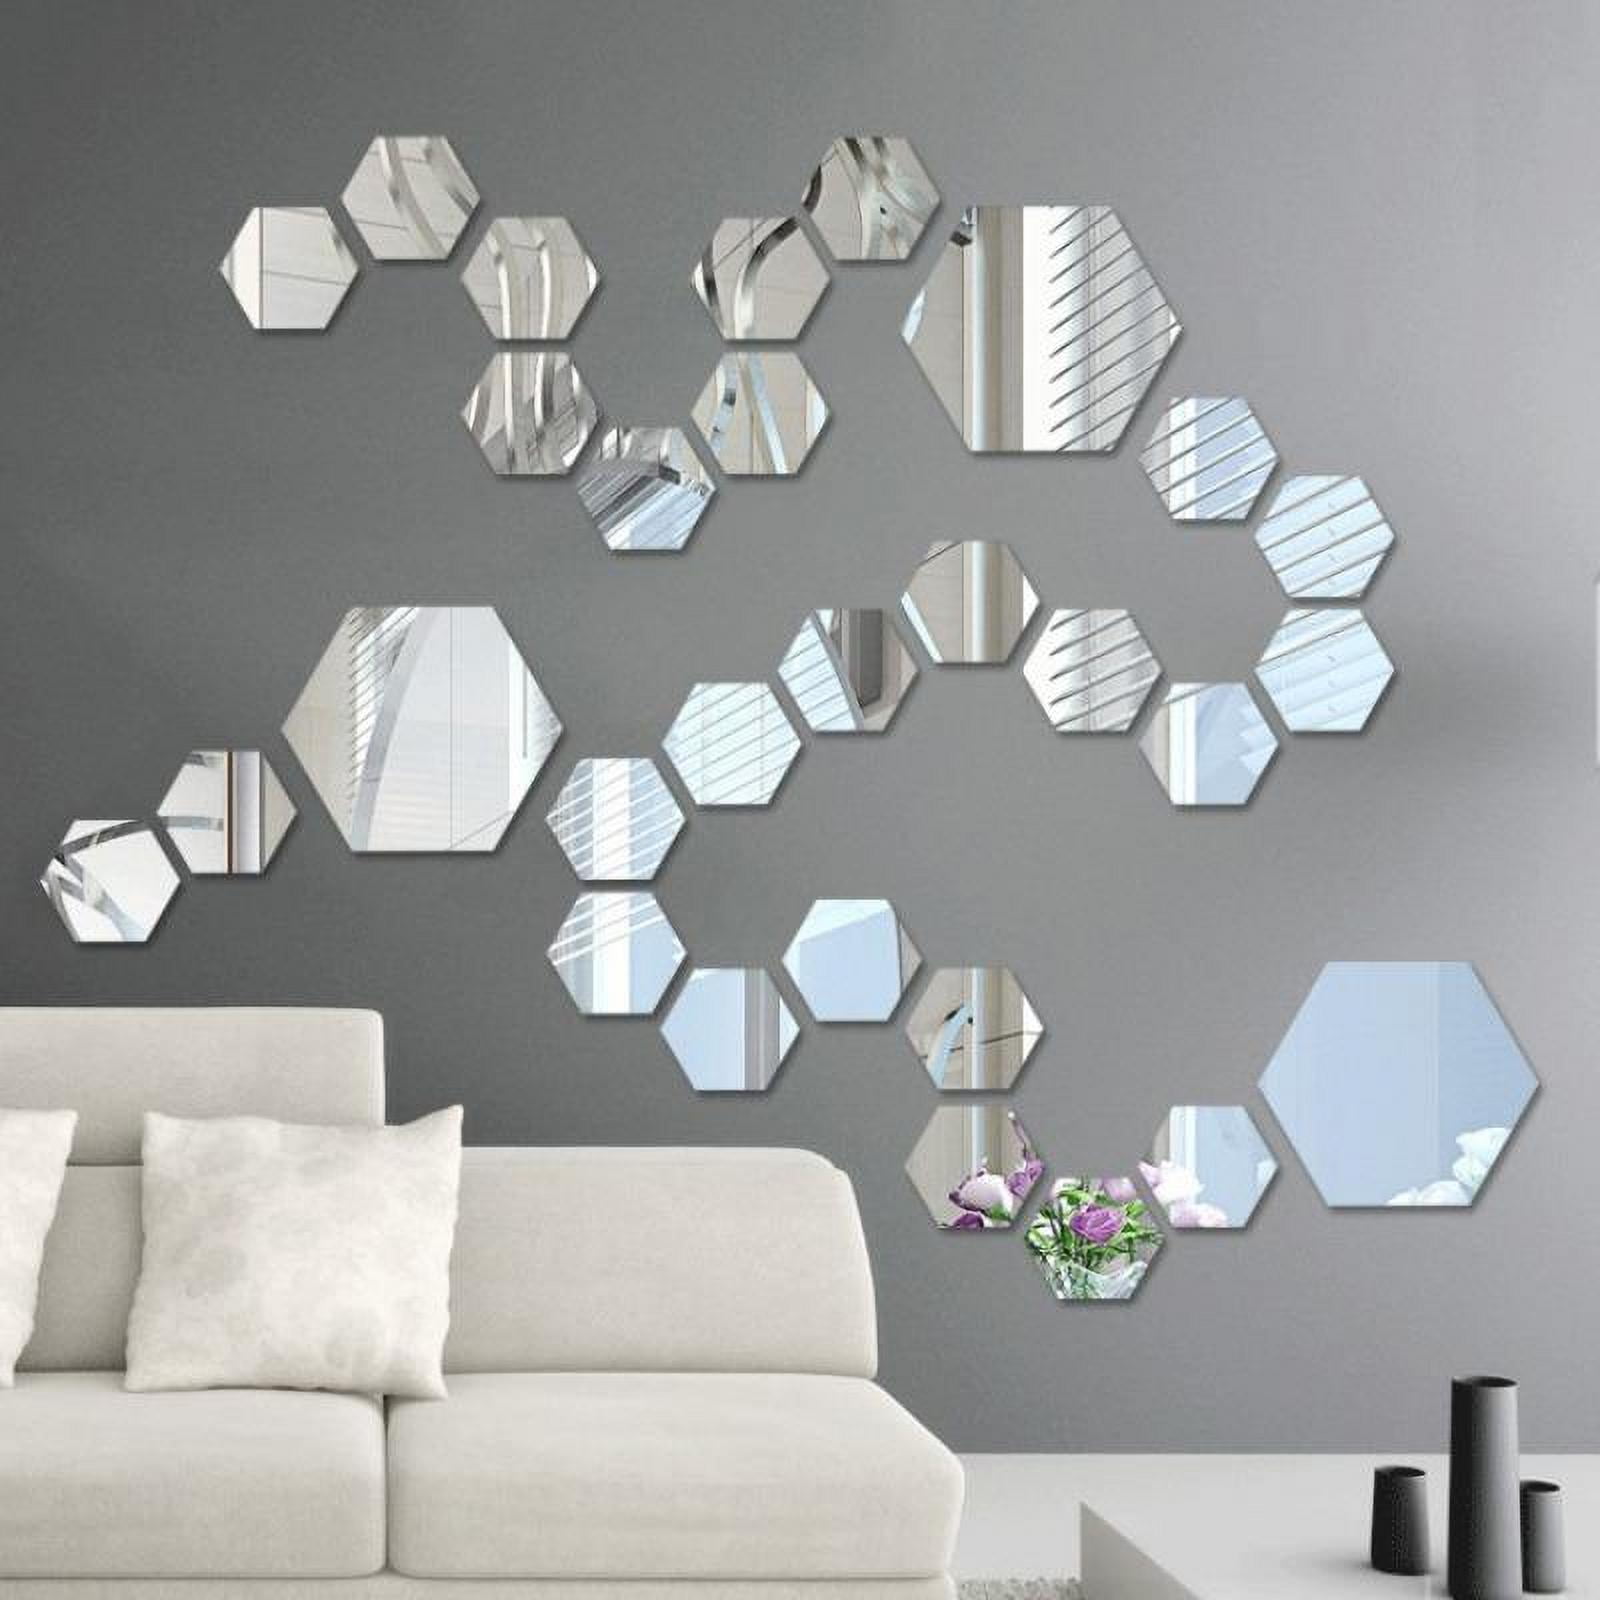  Motarto 16 Sheets Flexible Mirror Sheets Self Adhesive Mirror  Wall Stickers Removable Acrylic Mirror for Home Living Room Bedroom Decor,  4 x 4 inches : Home & Kitchen